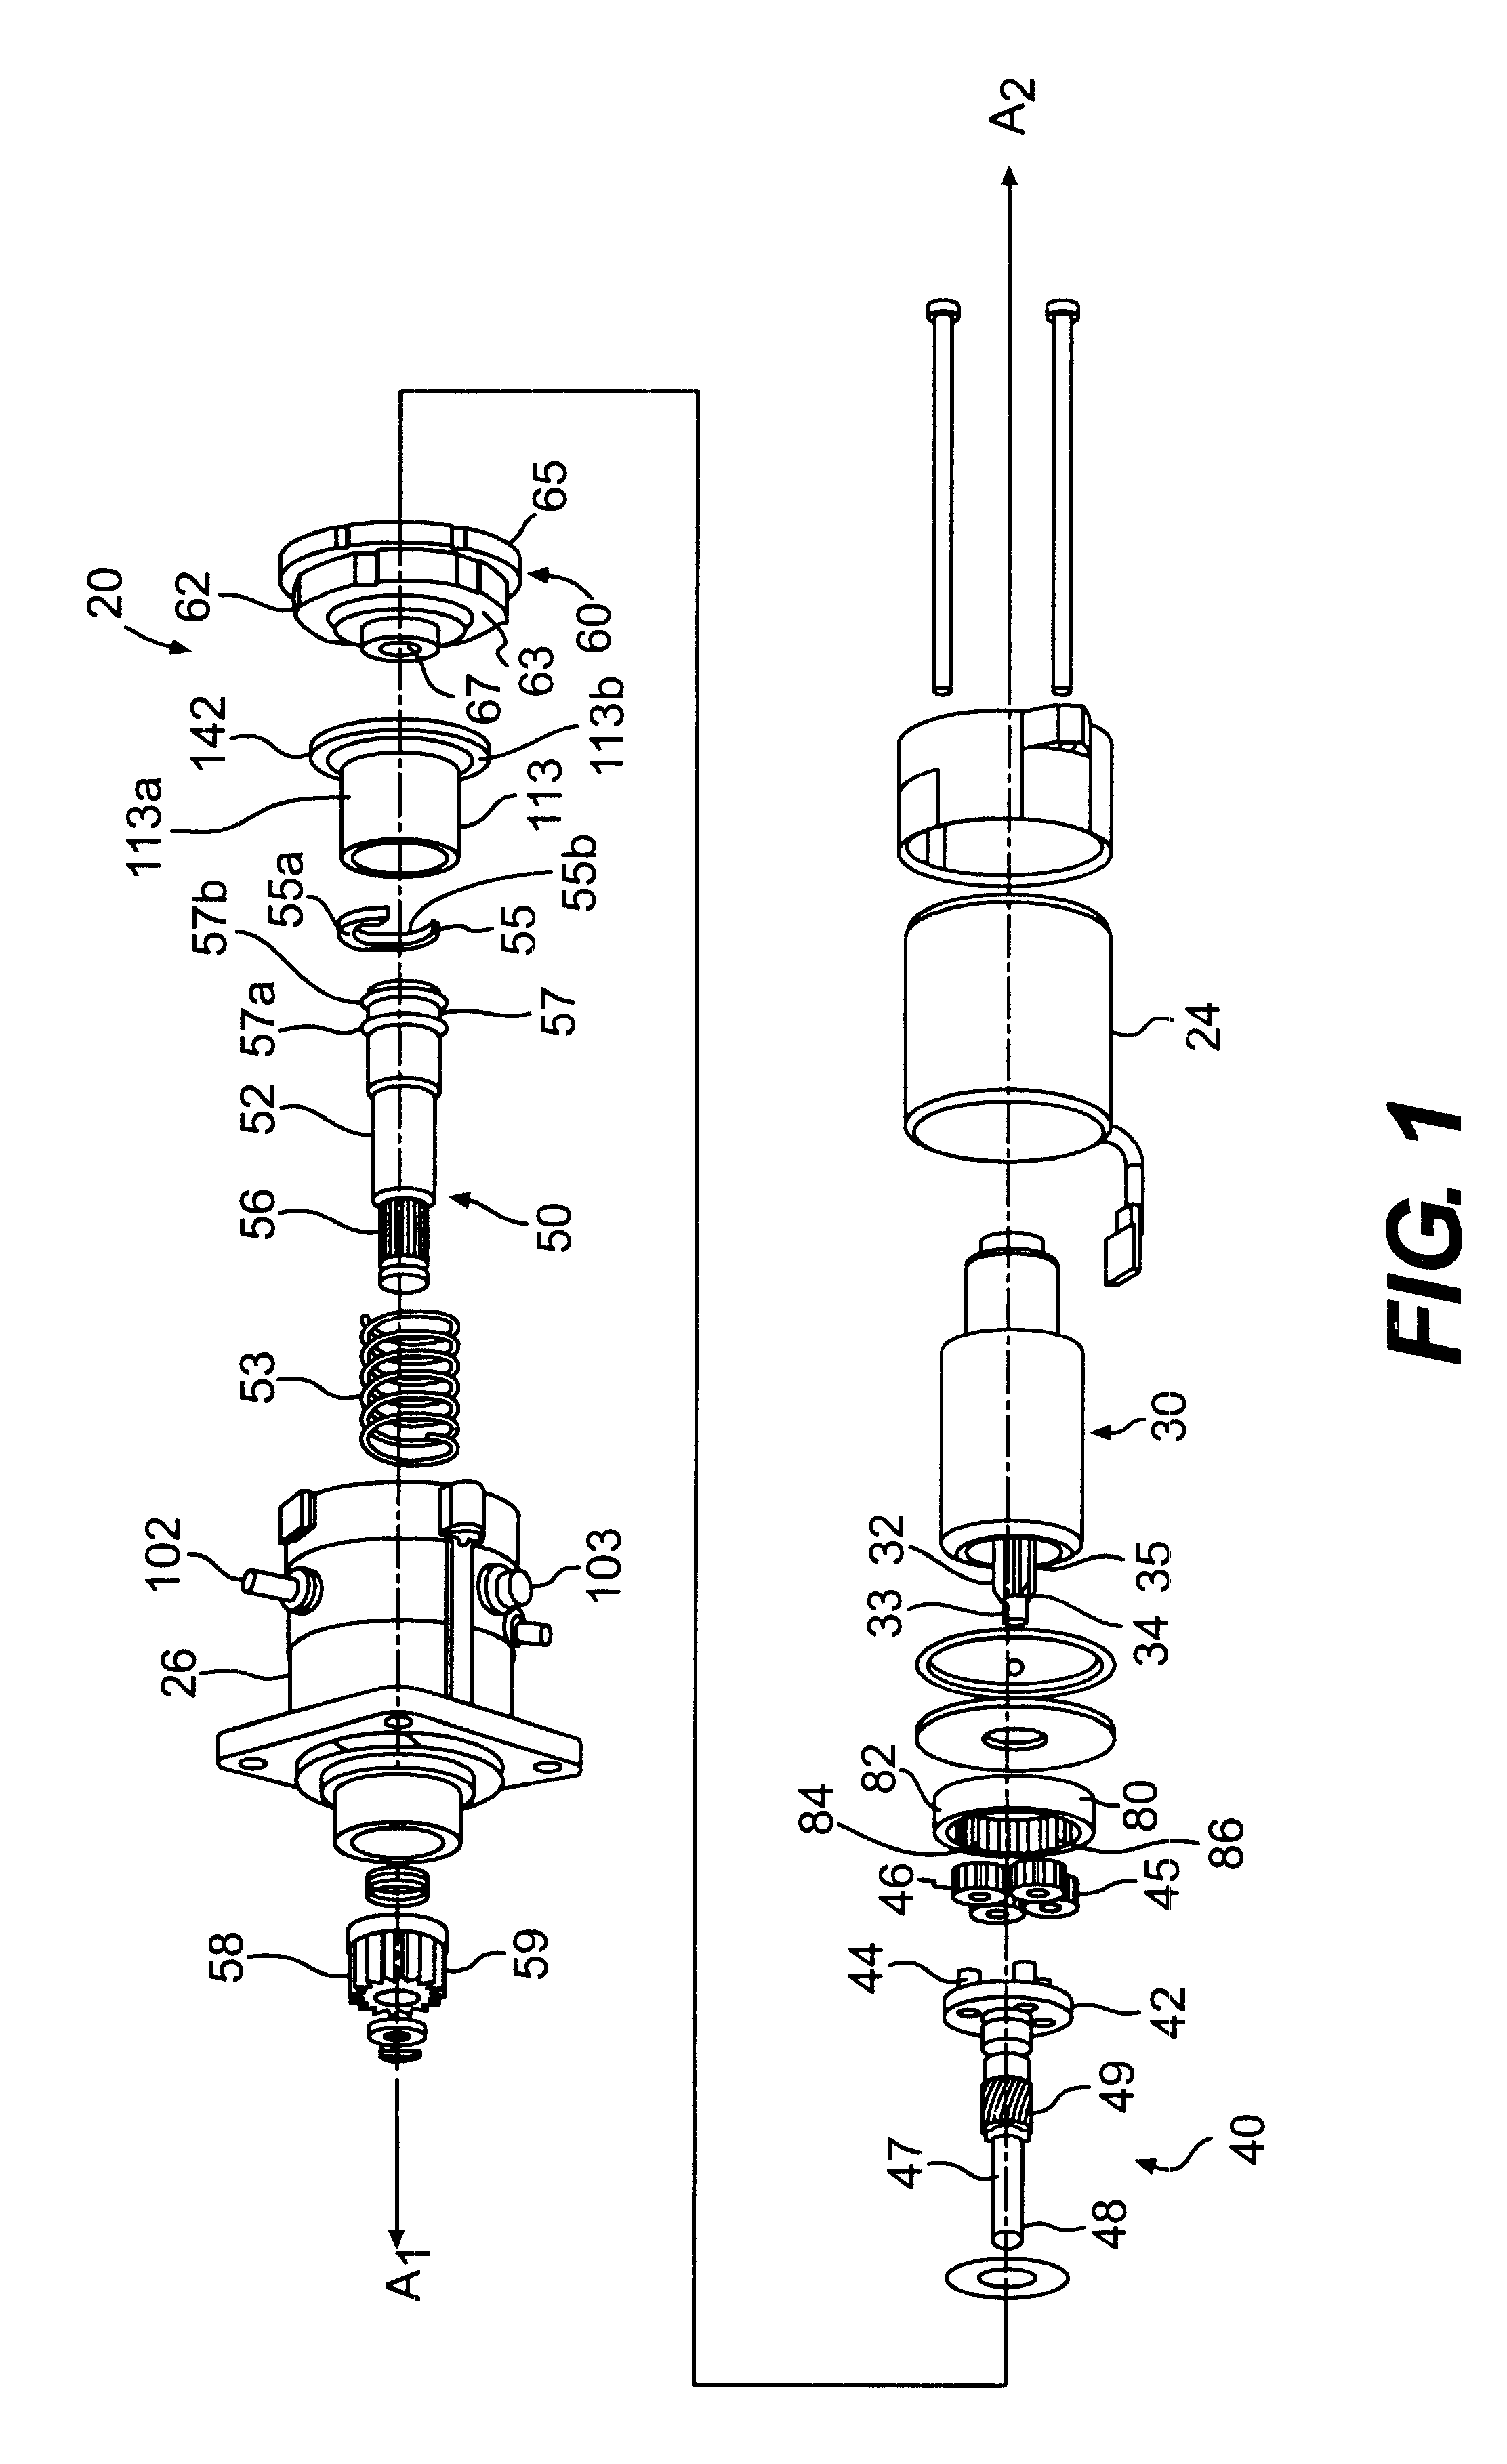 Engagement and disengagement mechanism for a coaxial starter motor assembly